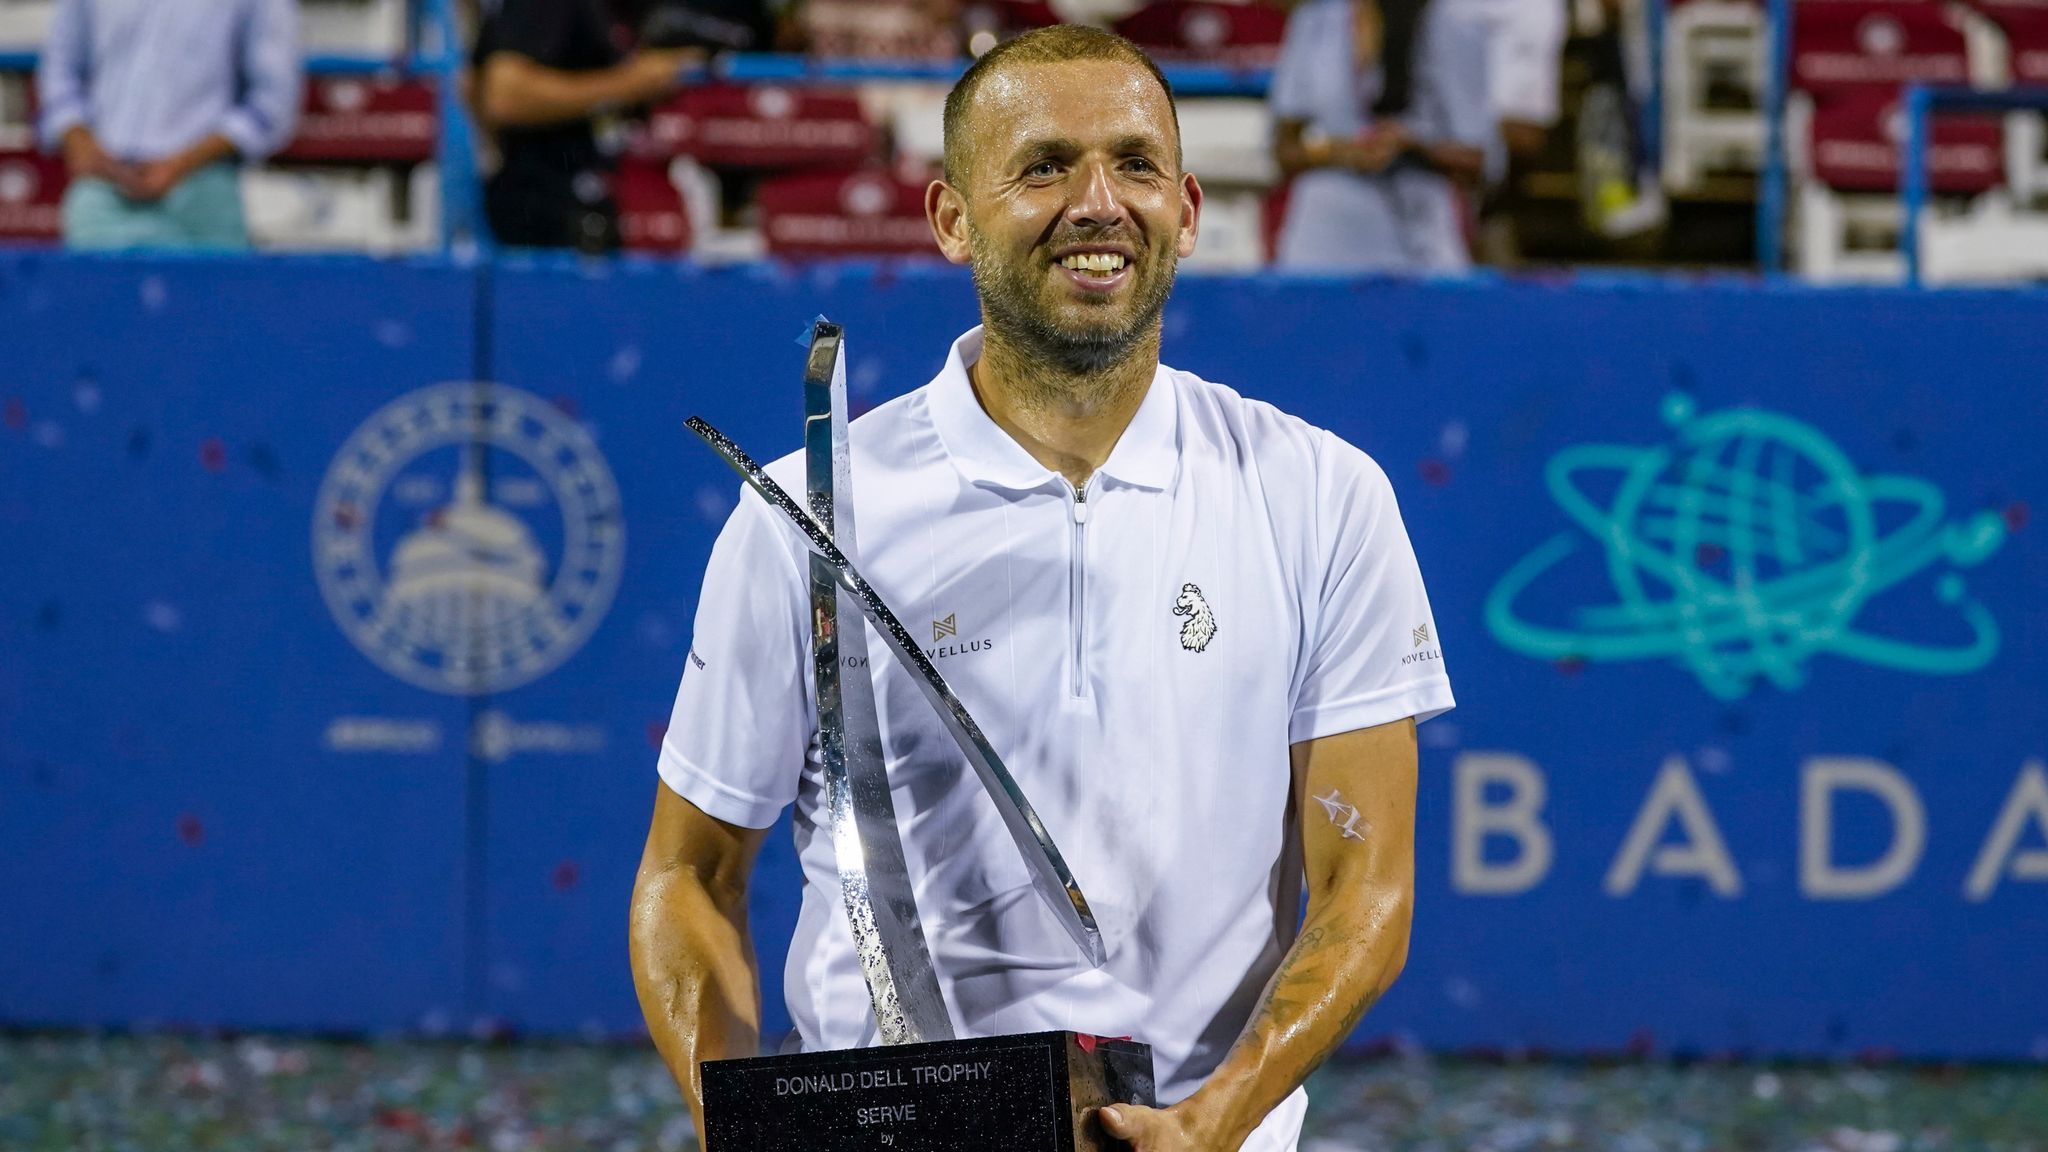 Dan Evans British No 2 claims biggest title of his career at the Citi Open in Washington Tennis News Sky Sports